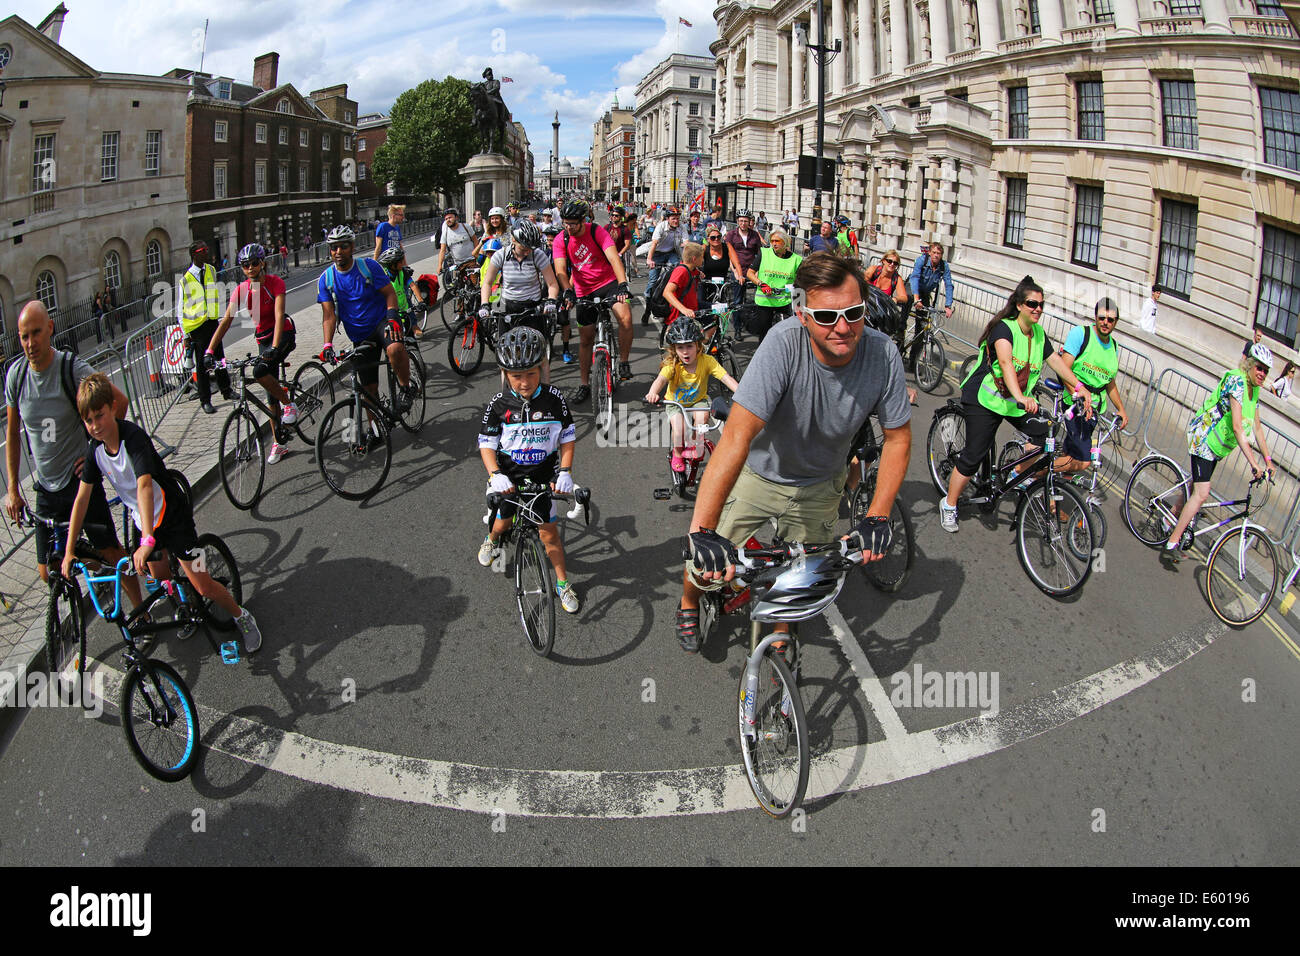 London, UK. 9th August 2014. Some of the 24,000 cyclists who took part in the Ride London 2014 cycling on bicycles through central London Credit:  Paul Brown/Alamy Live News Stock Photo